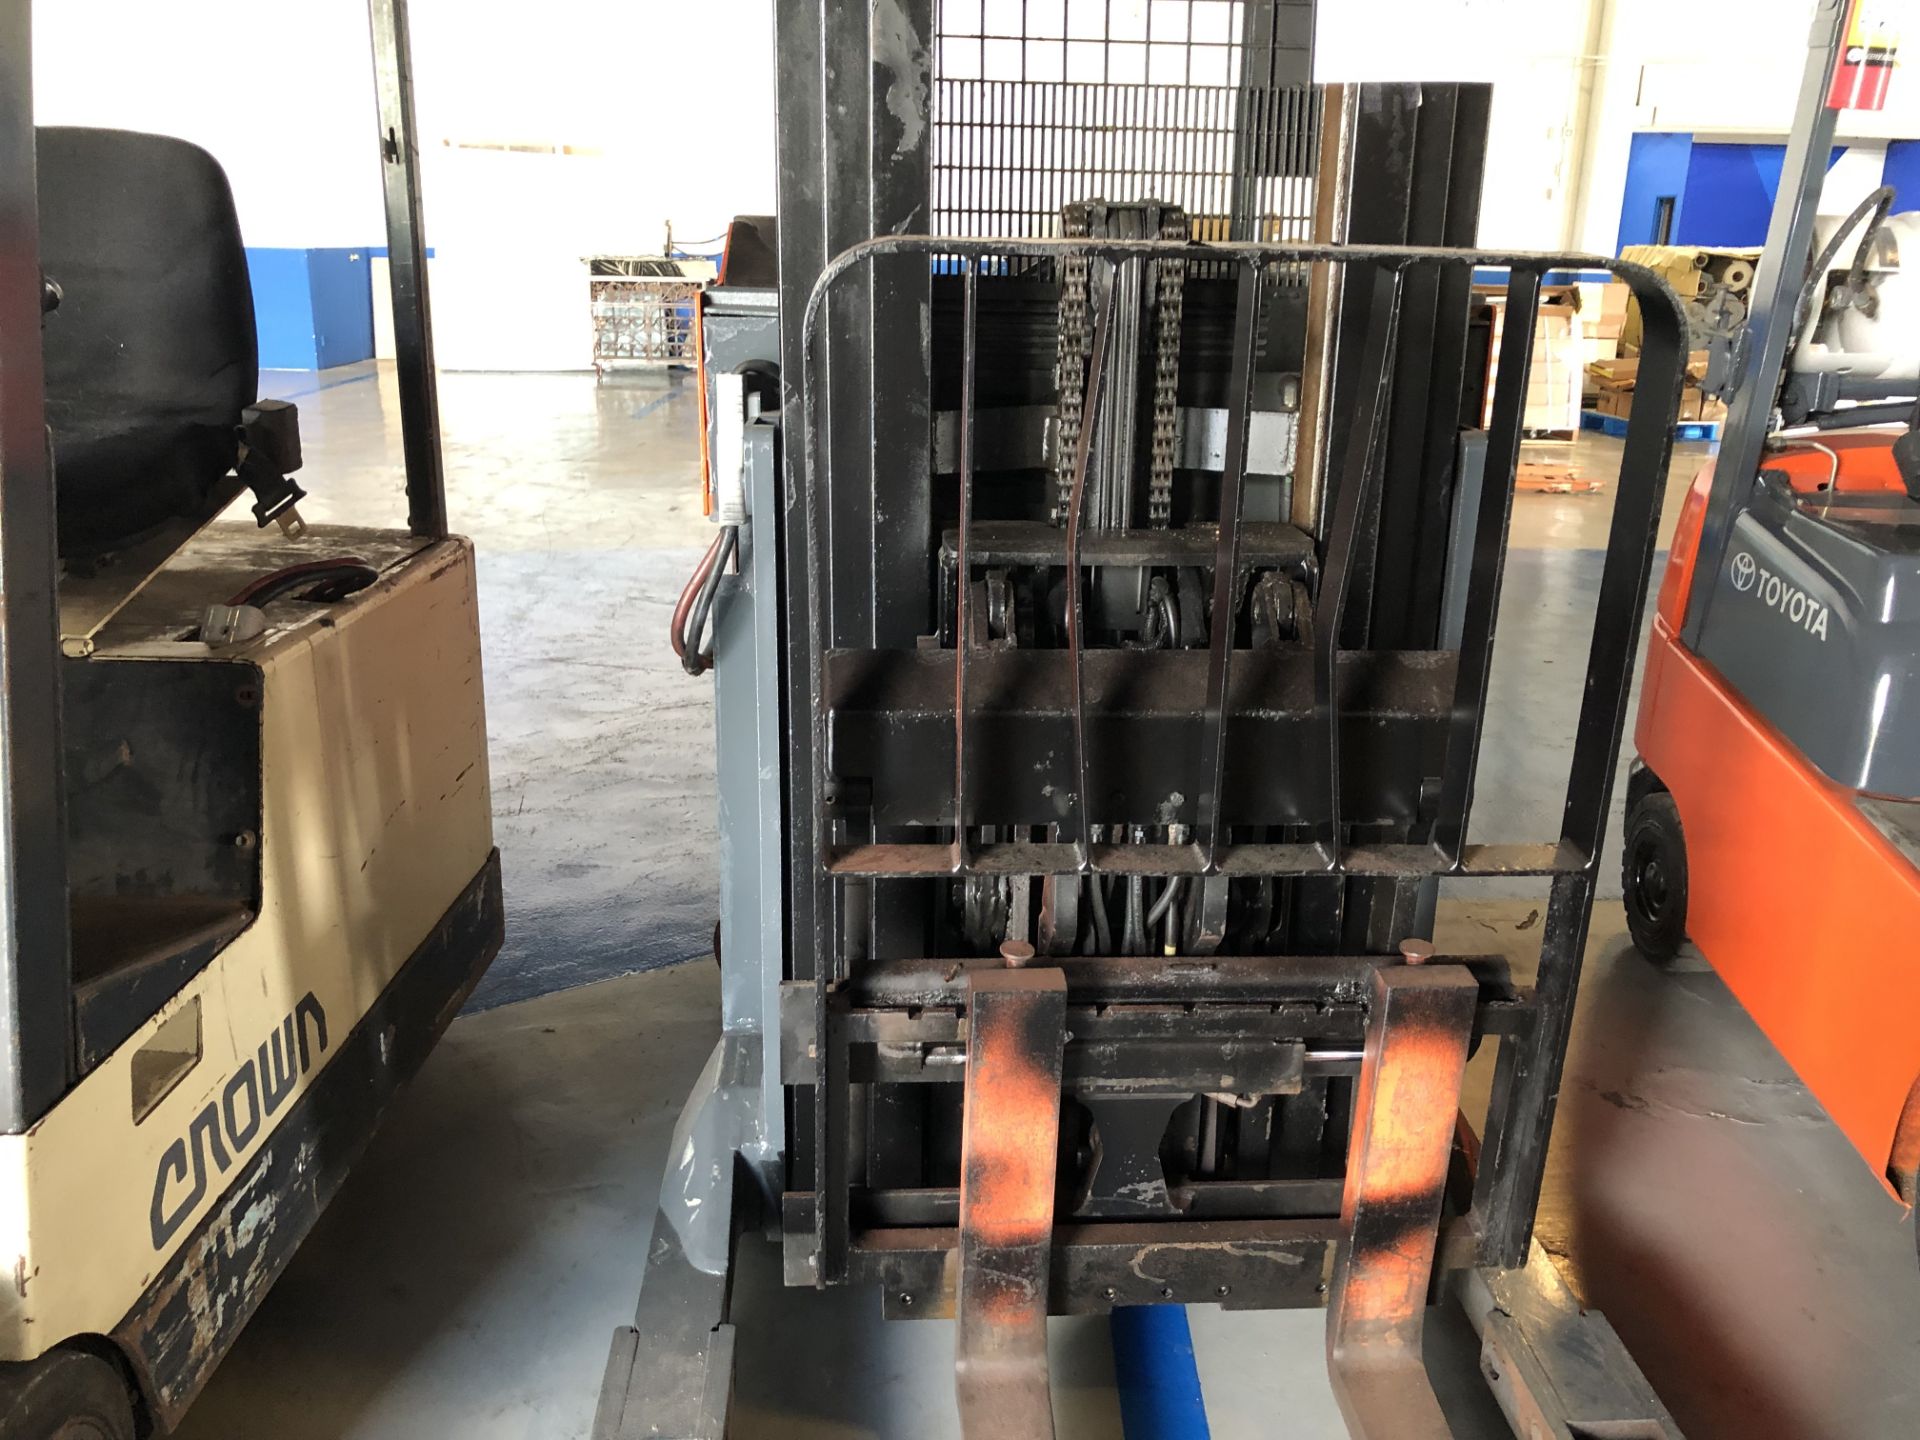 TOYOTA 6BRU18 ORDER PICKER - ELECTRIC / 5000LB CAPACITY / 3 STAGE